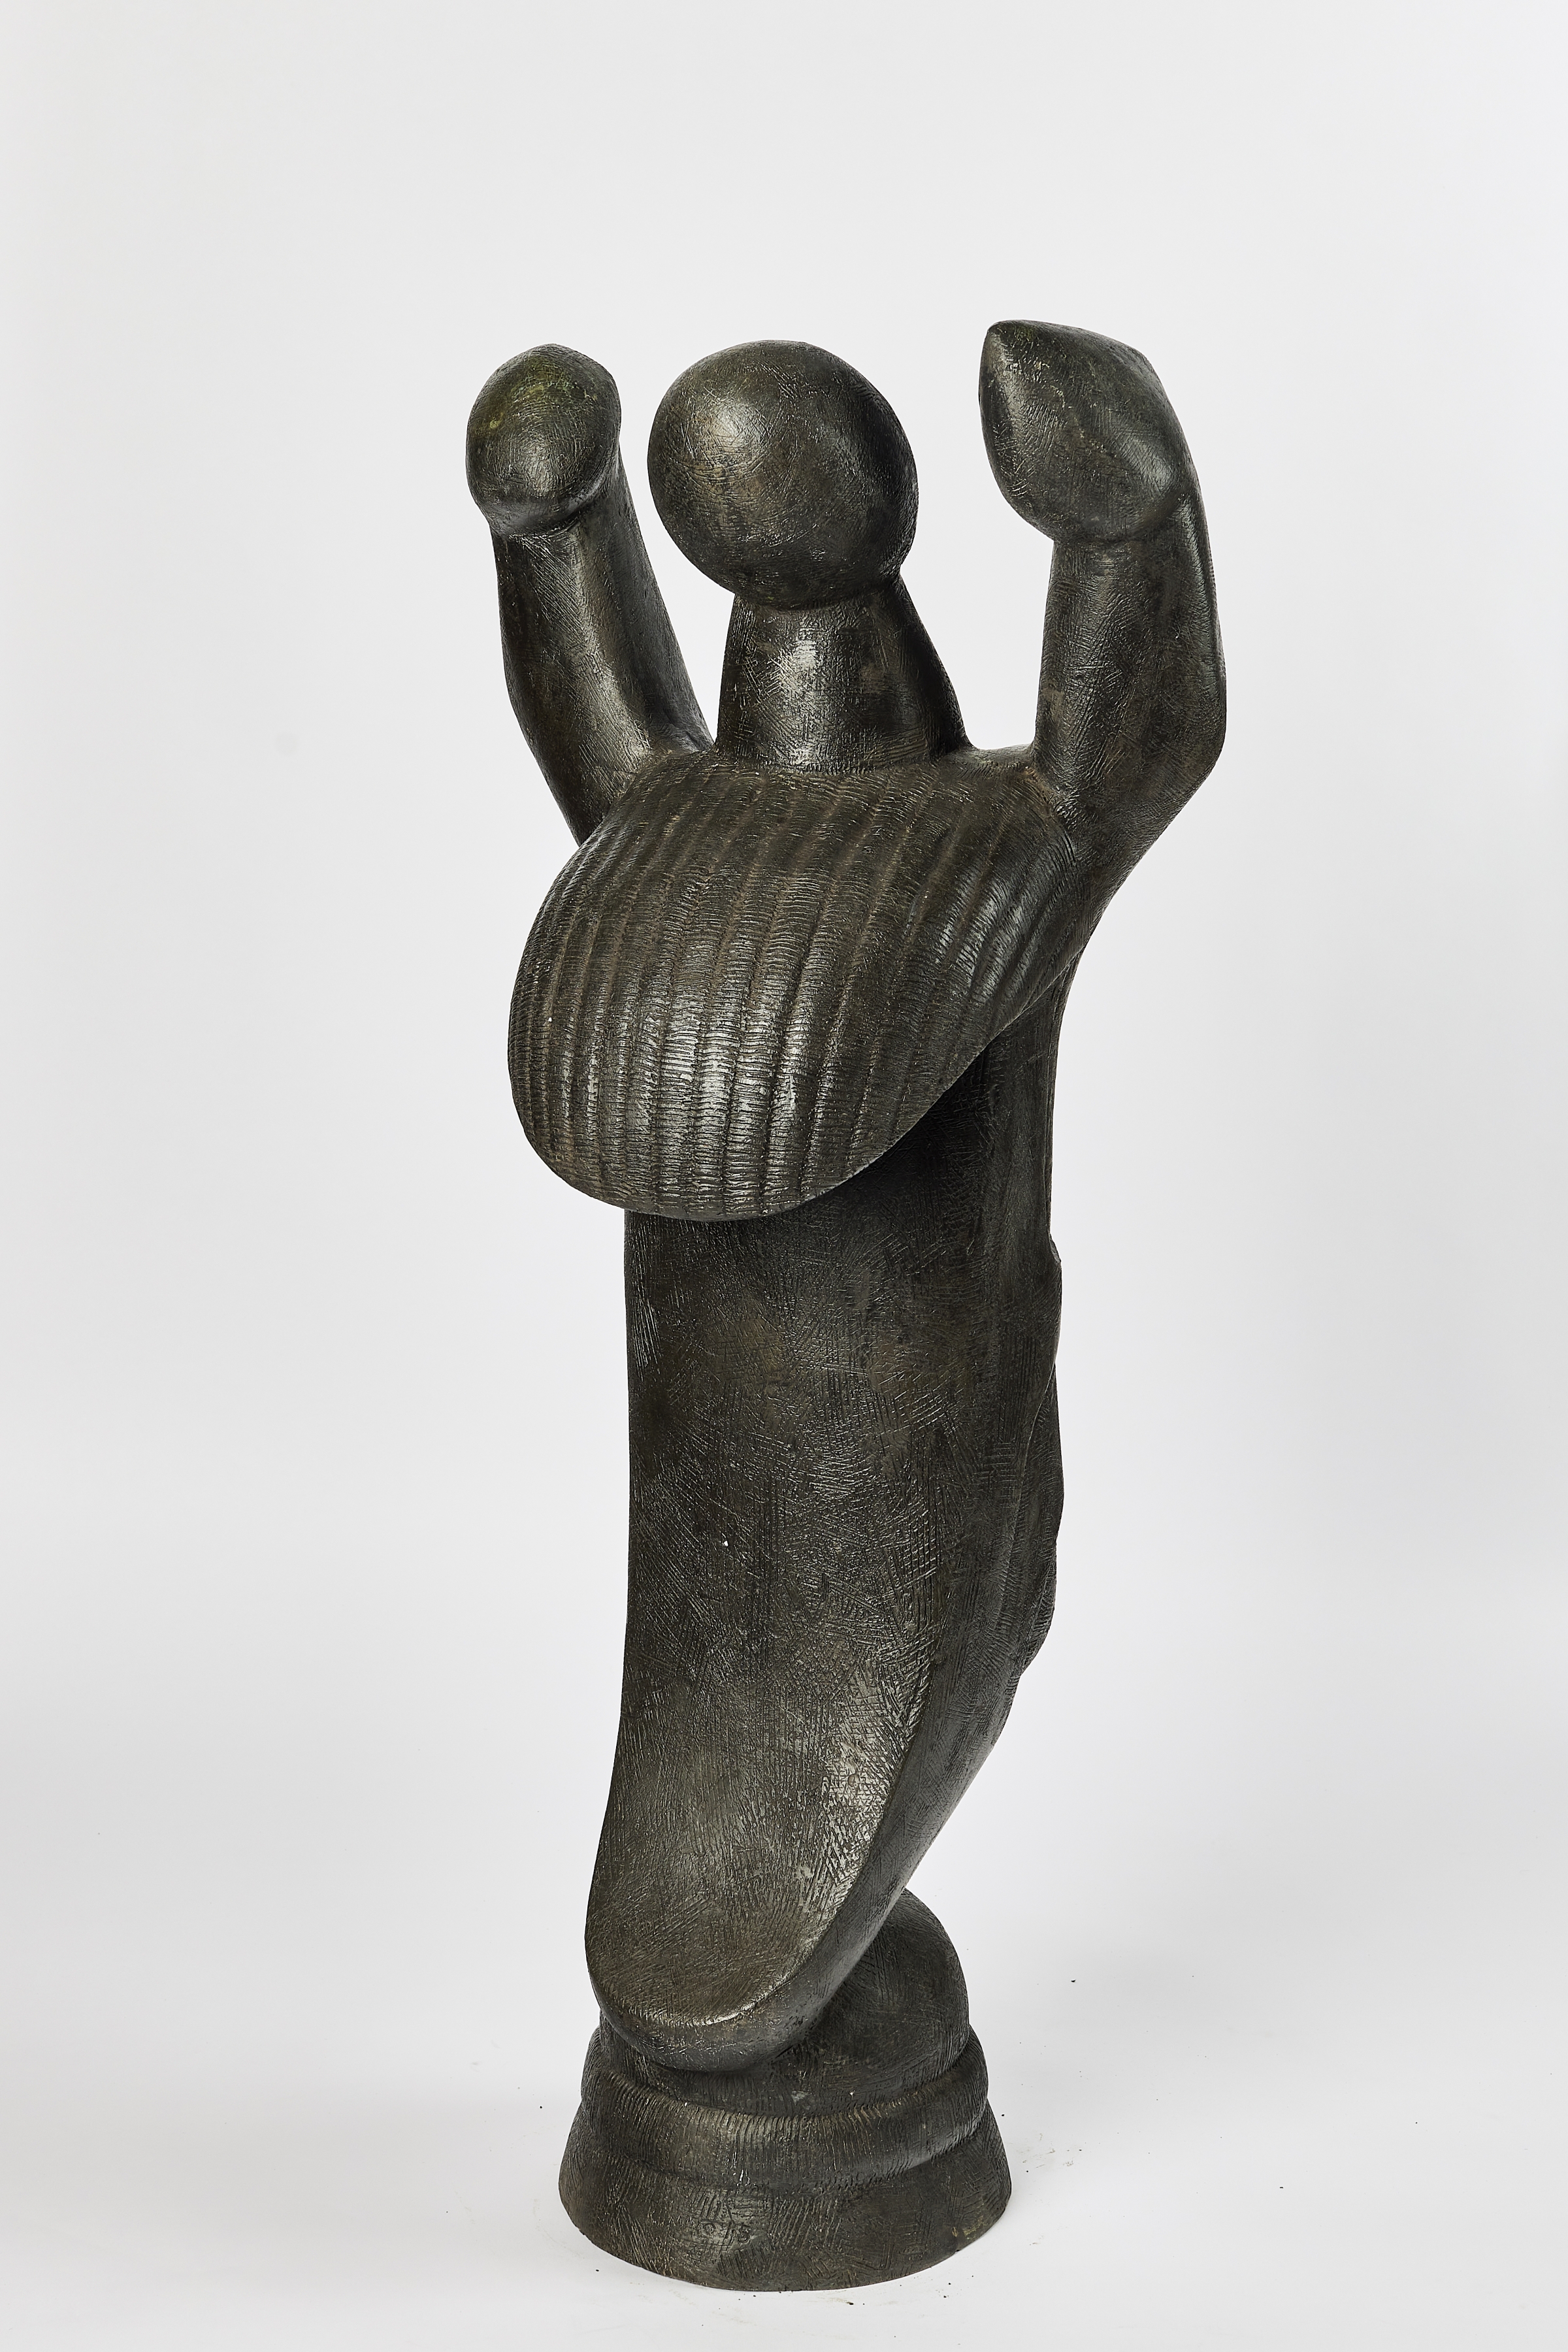 Sydney Kumalo

Anguished Angel, 1973

Bronze

96 x 38 x 33.5 cm (37.8 x 15 x 13 in)

Edition 1 of 5

Enquire

&amp;nbsp;